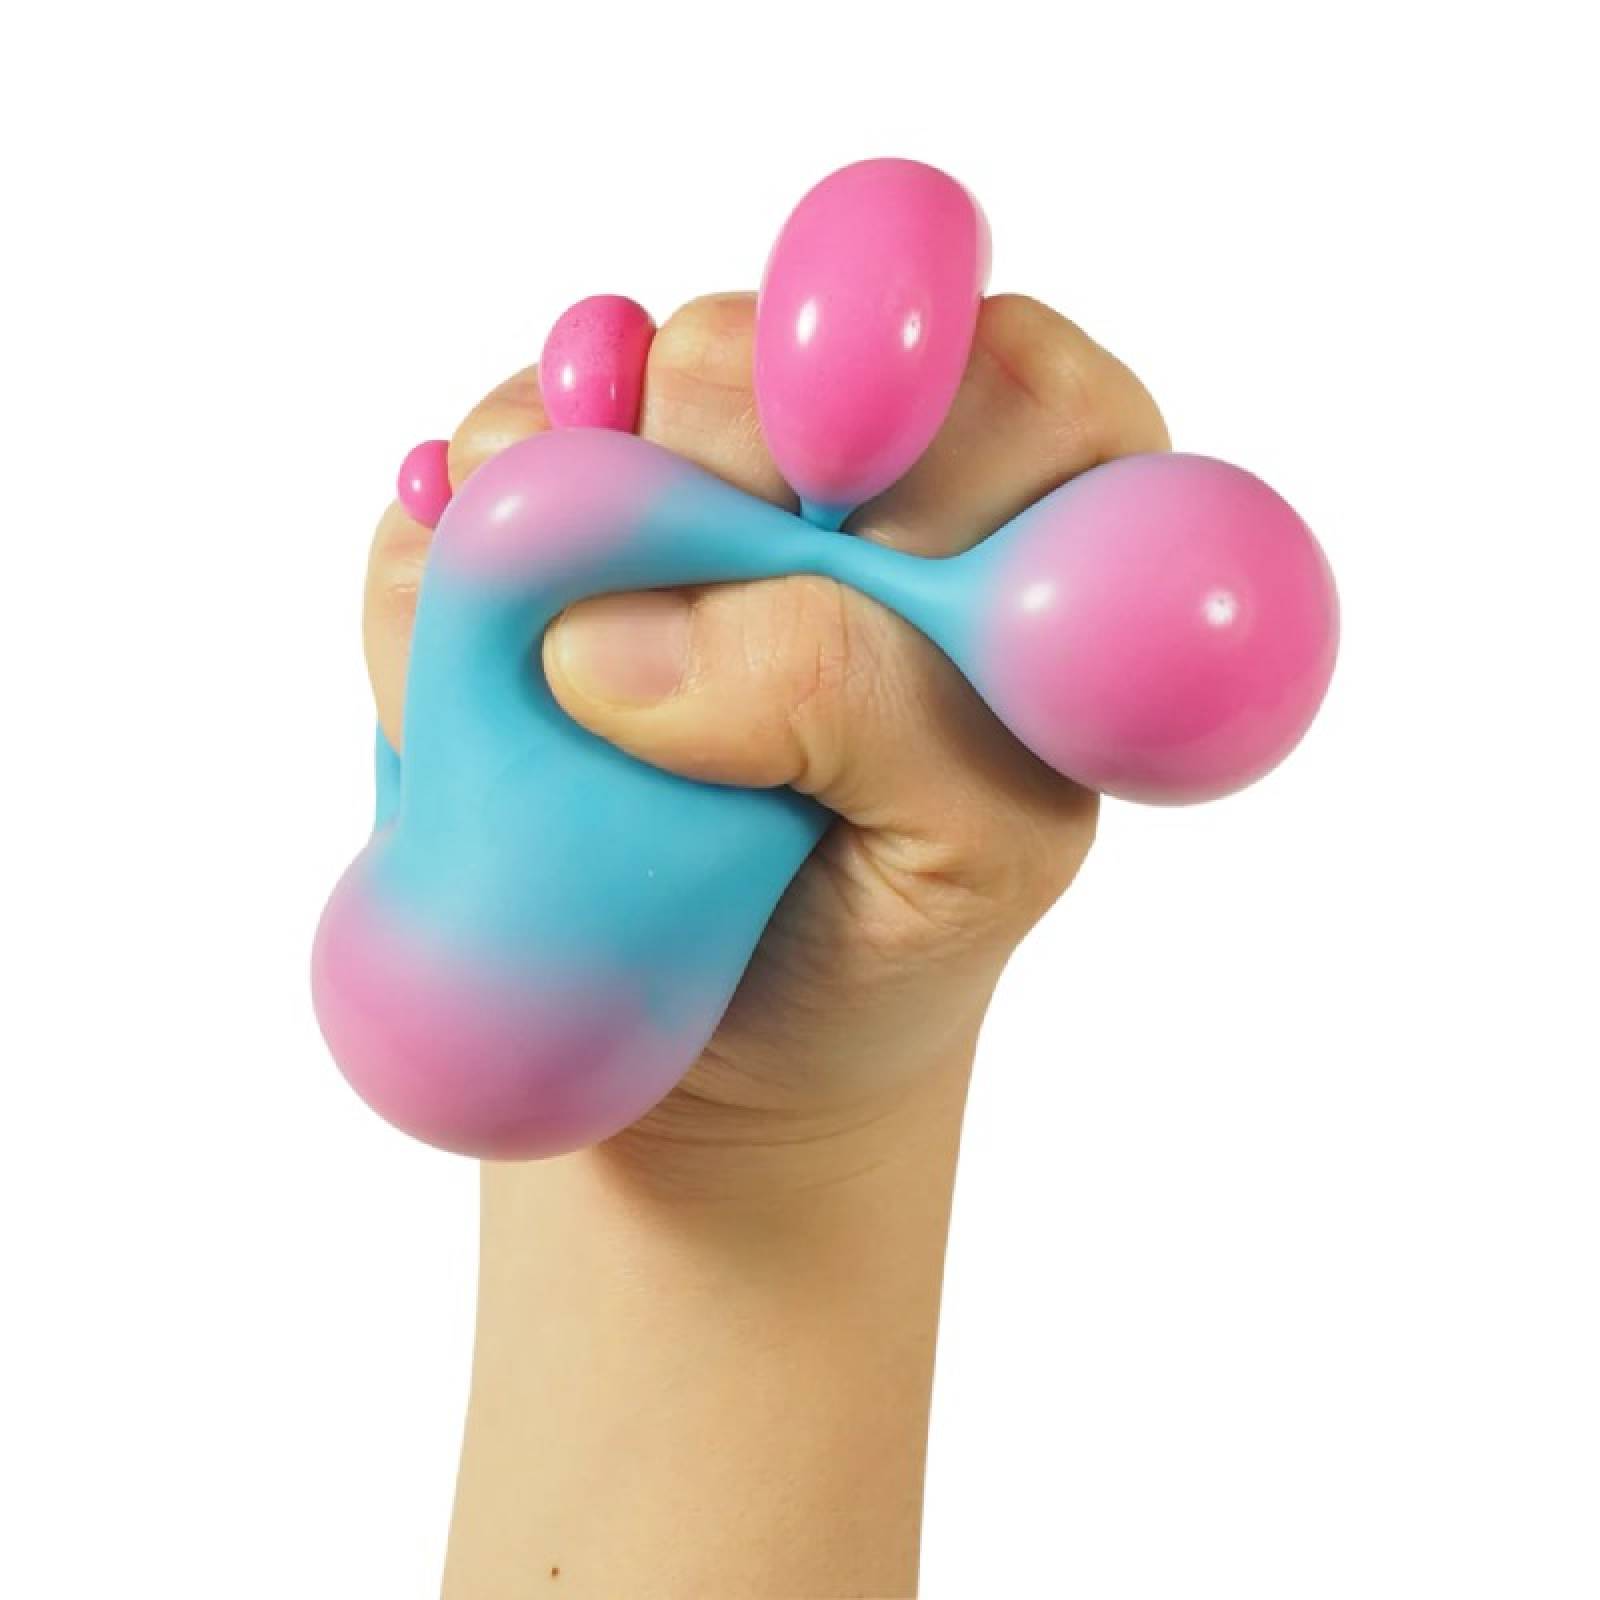 Nee Doh Stretchy Colour Change Stress Ball 3+ thumbnails